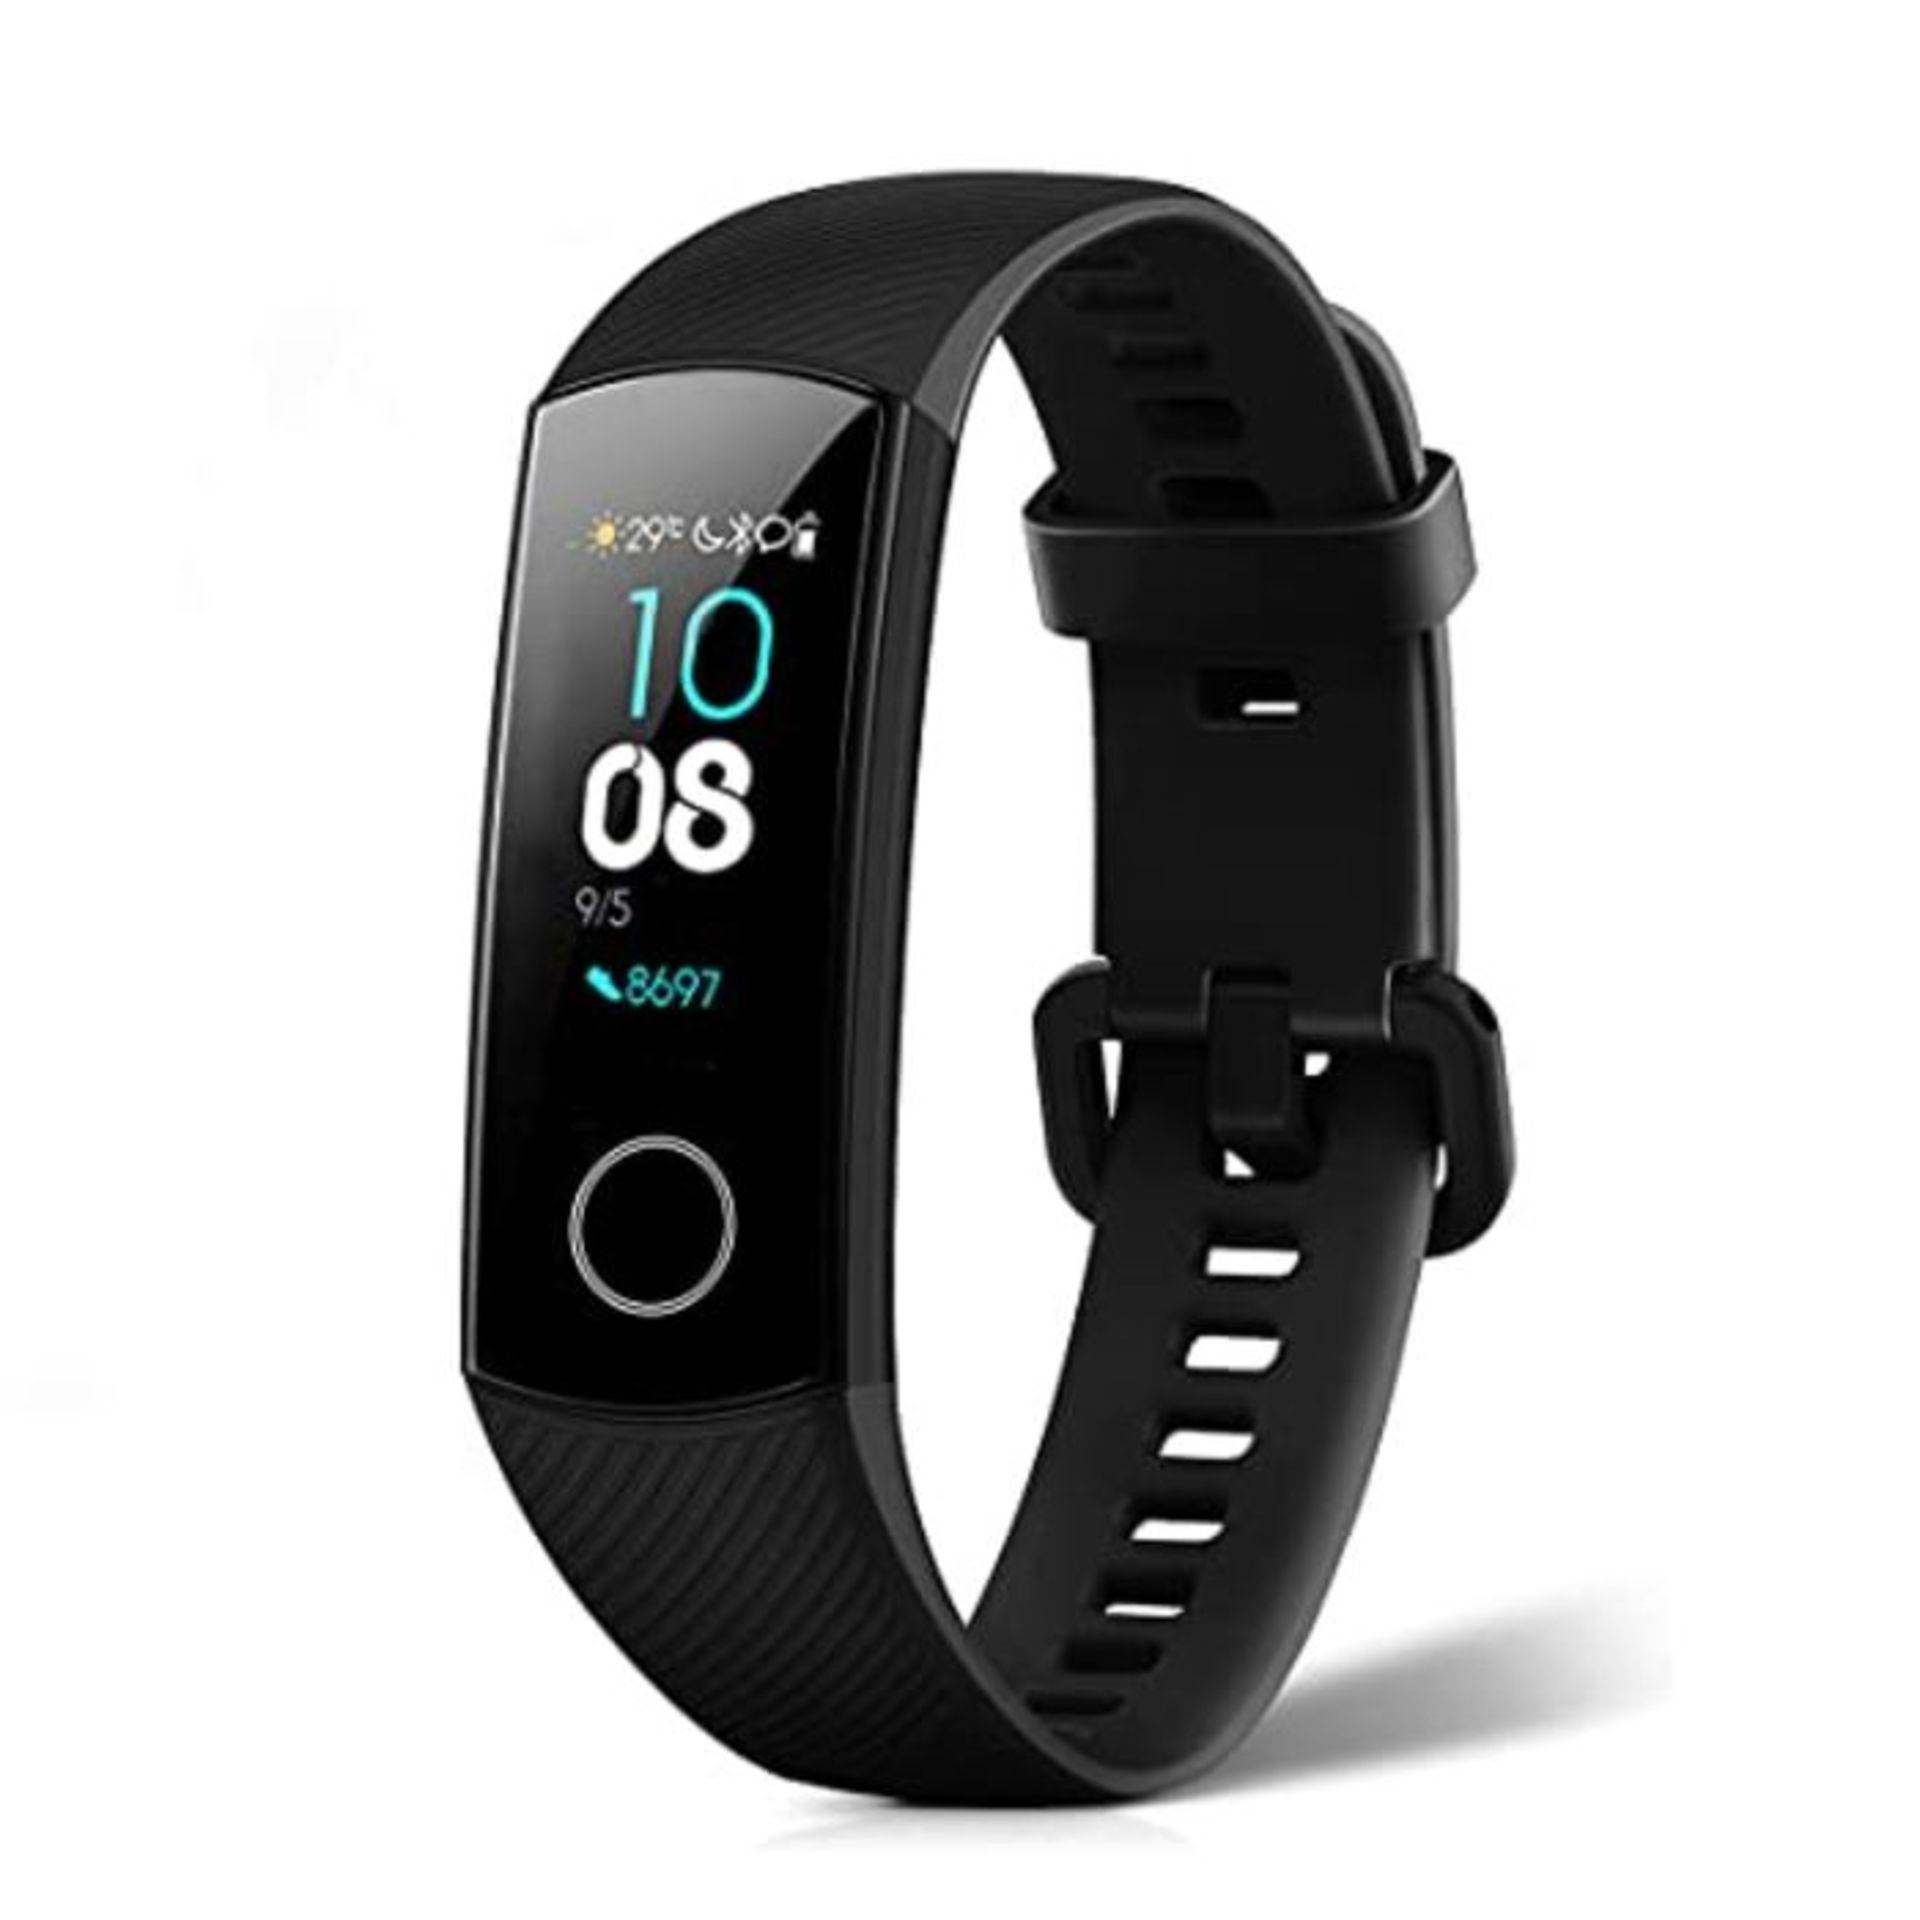 HONOR Band 5 Fitness Bracelet, 0.95 Inch AMOLED Display, Tracker with Heart Rate Monit